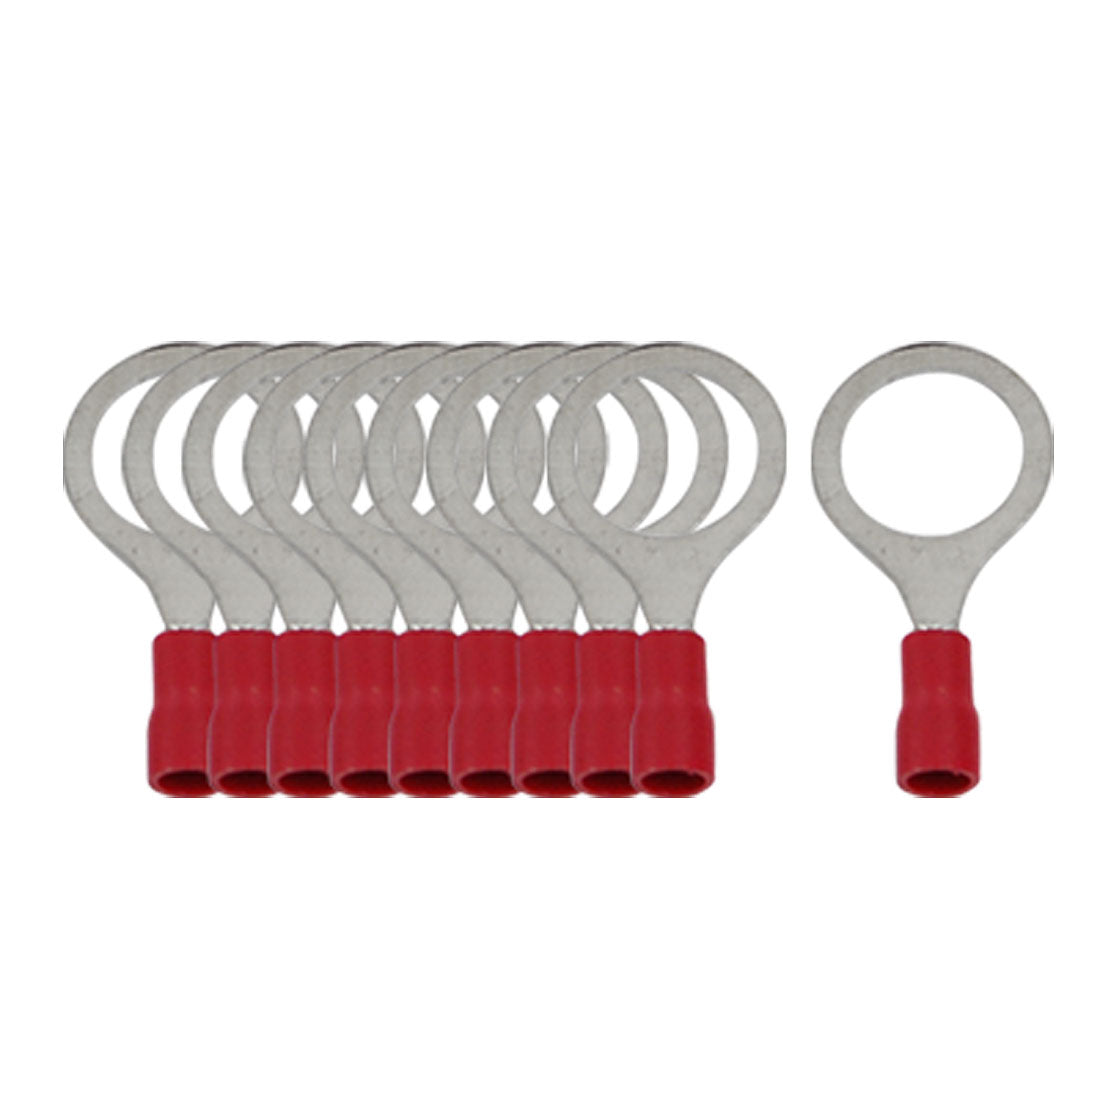 uxcell Uxcell RV1.25-12 Red Insulated Sleeve Ring Tongue Crimp Terminals 10 Pcs